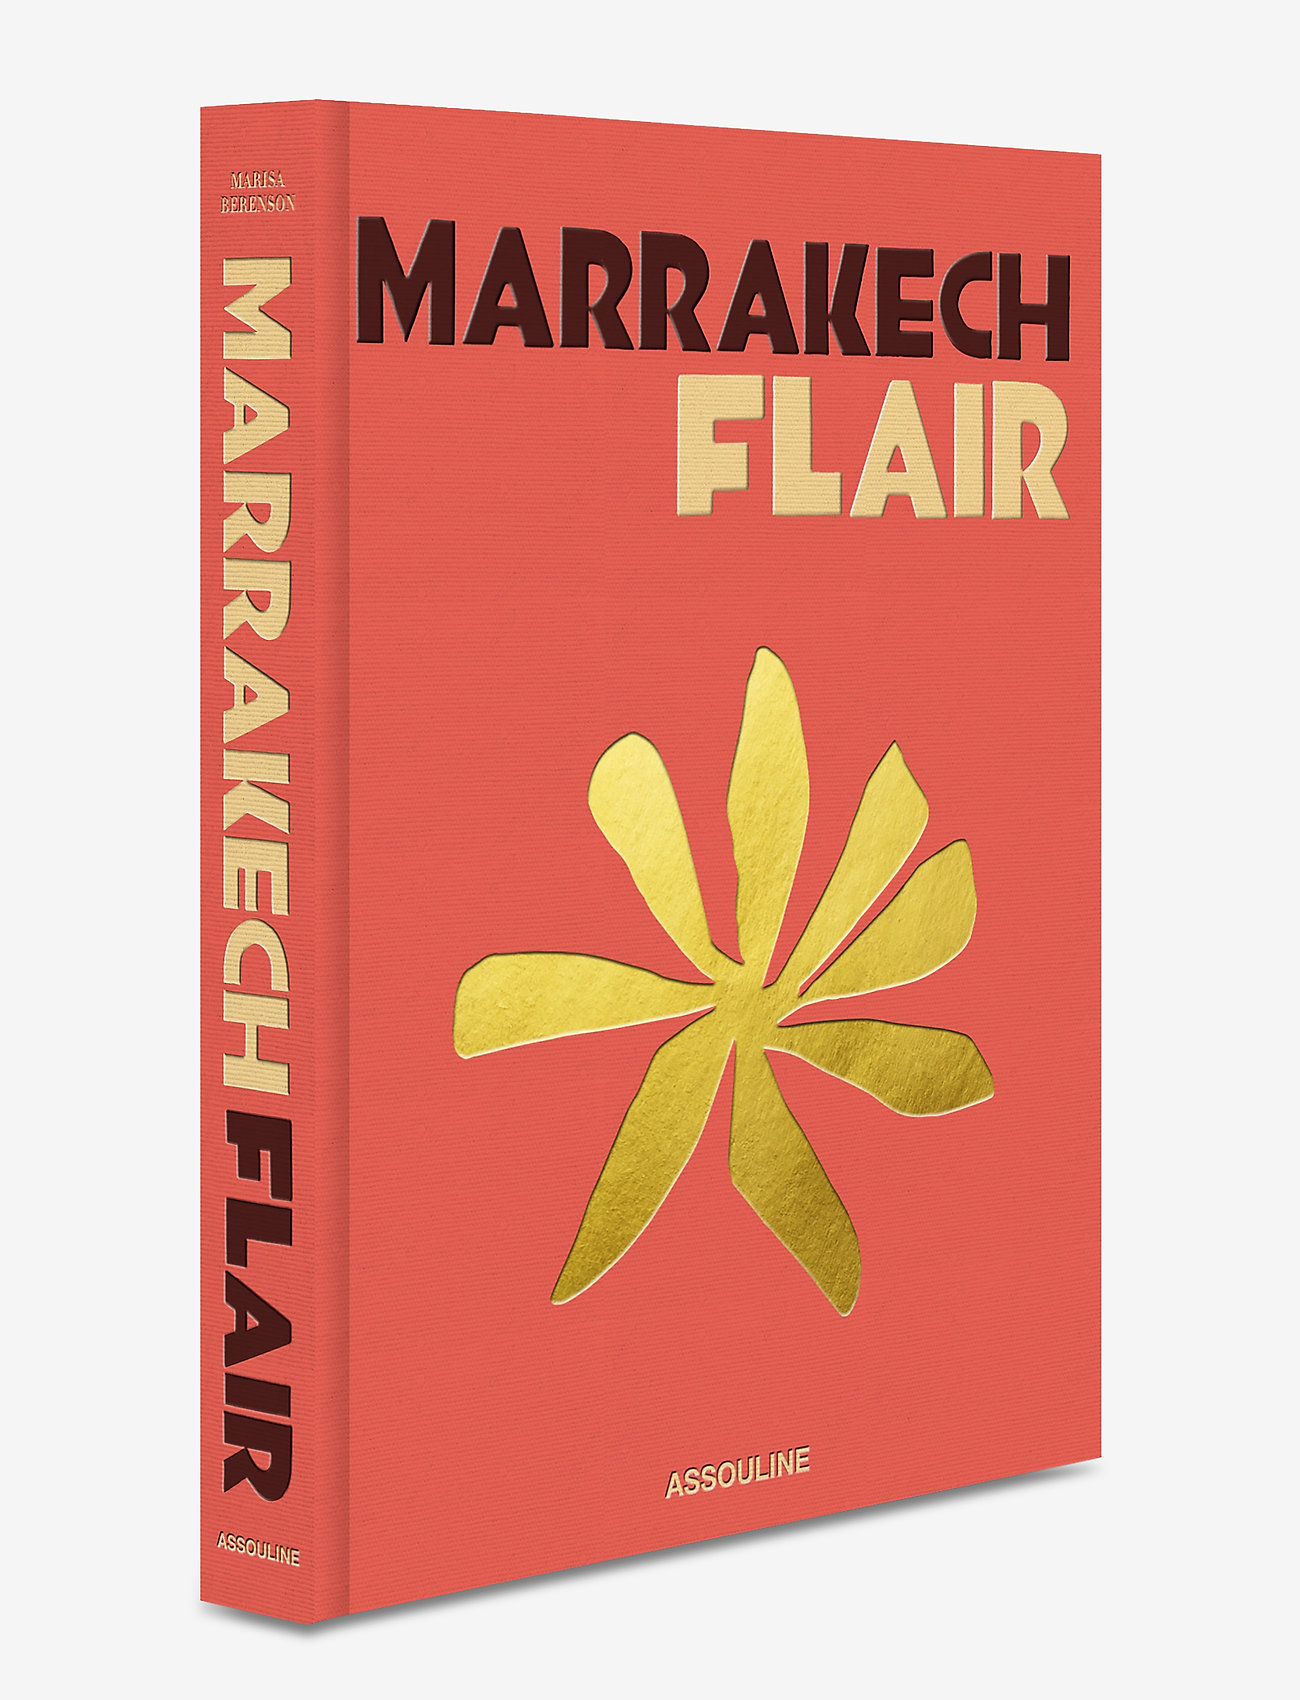 New Mags - Marrakech Flair - birthday gifts - peach/gold - 1